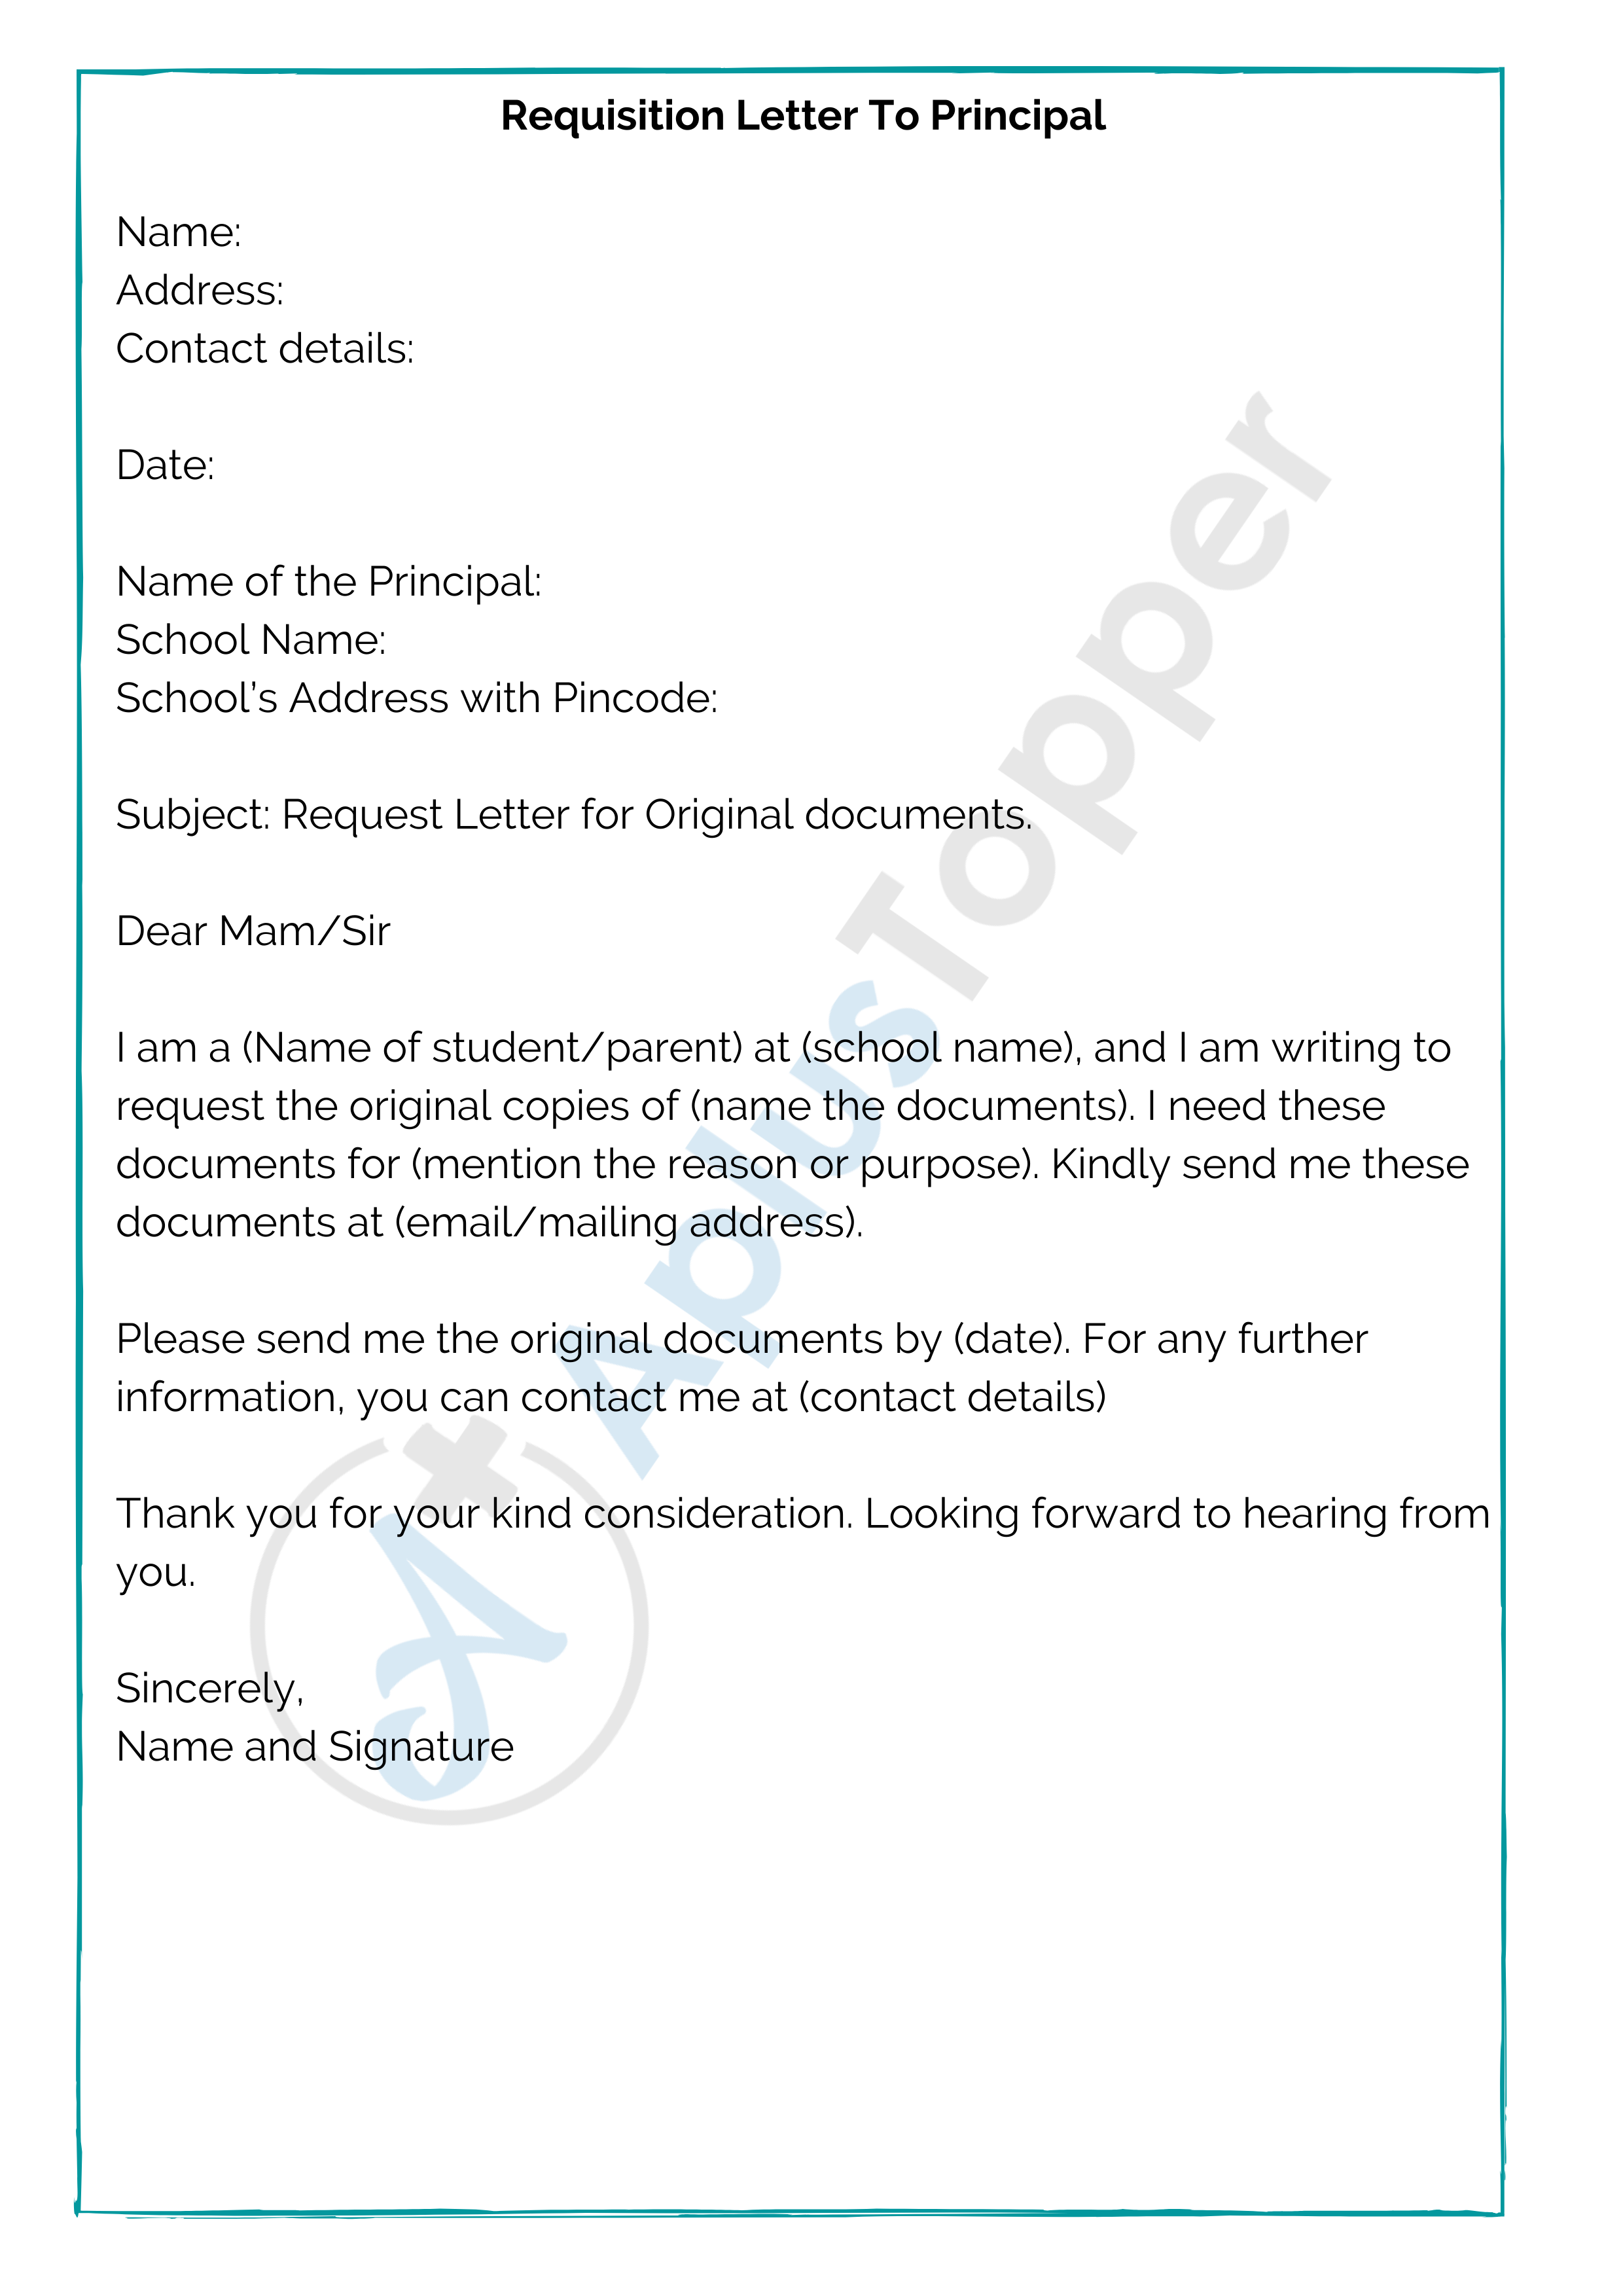 Requisition Letter To Principal